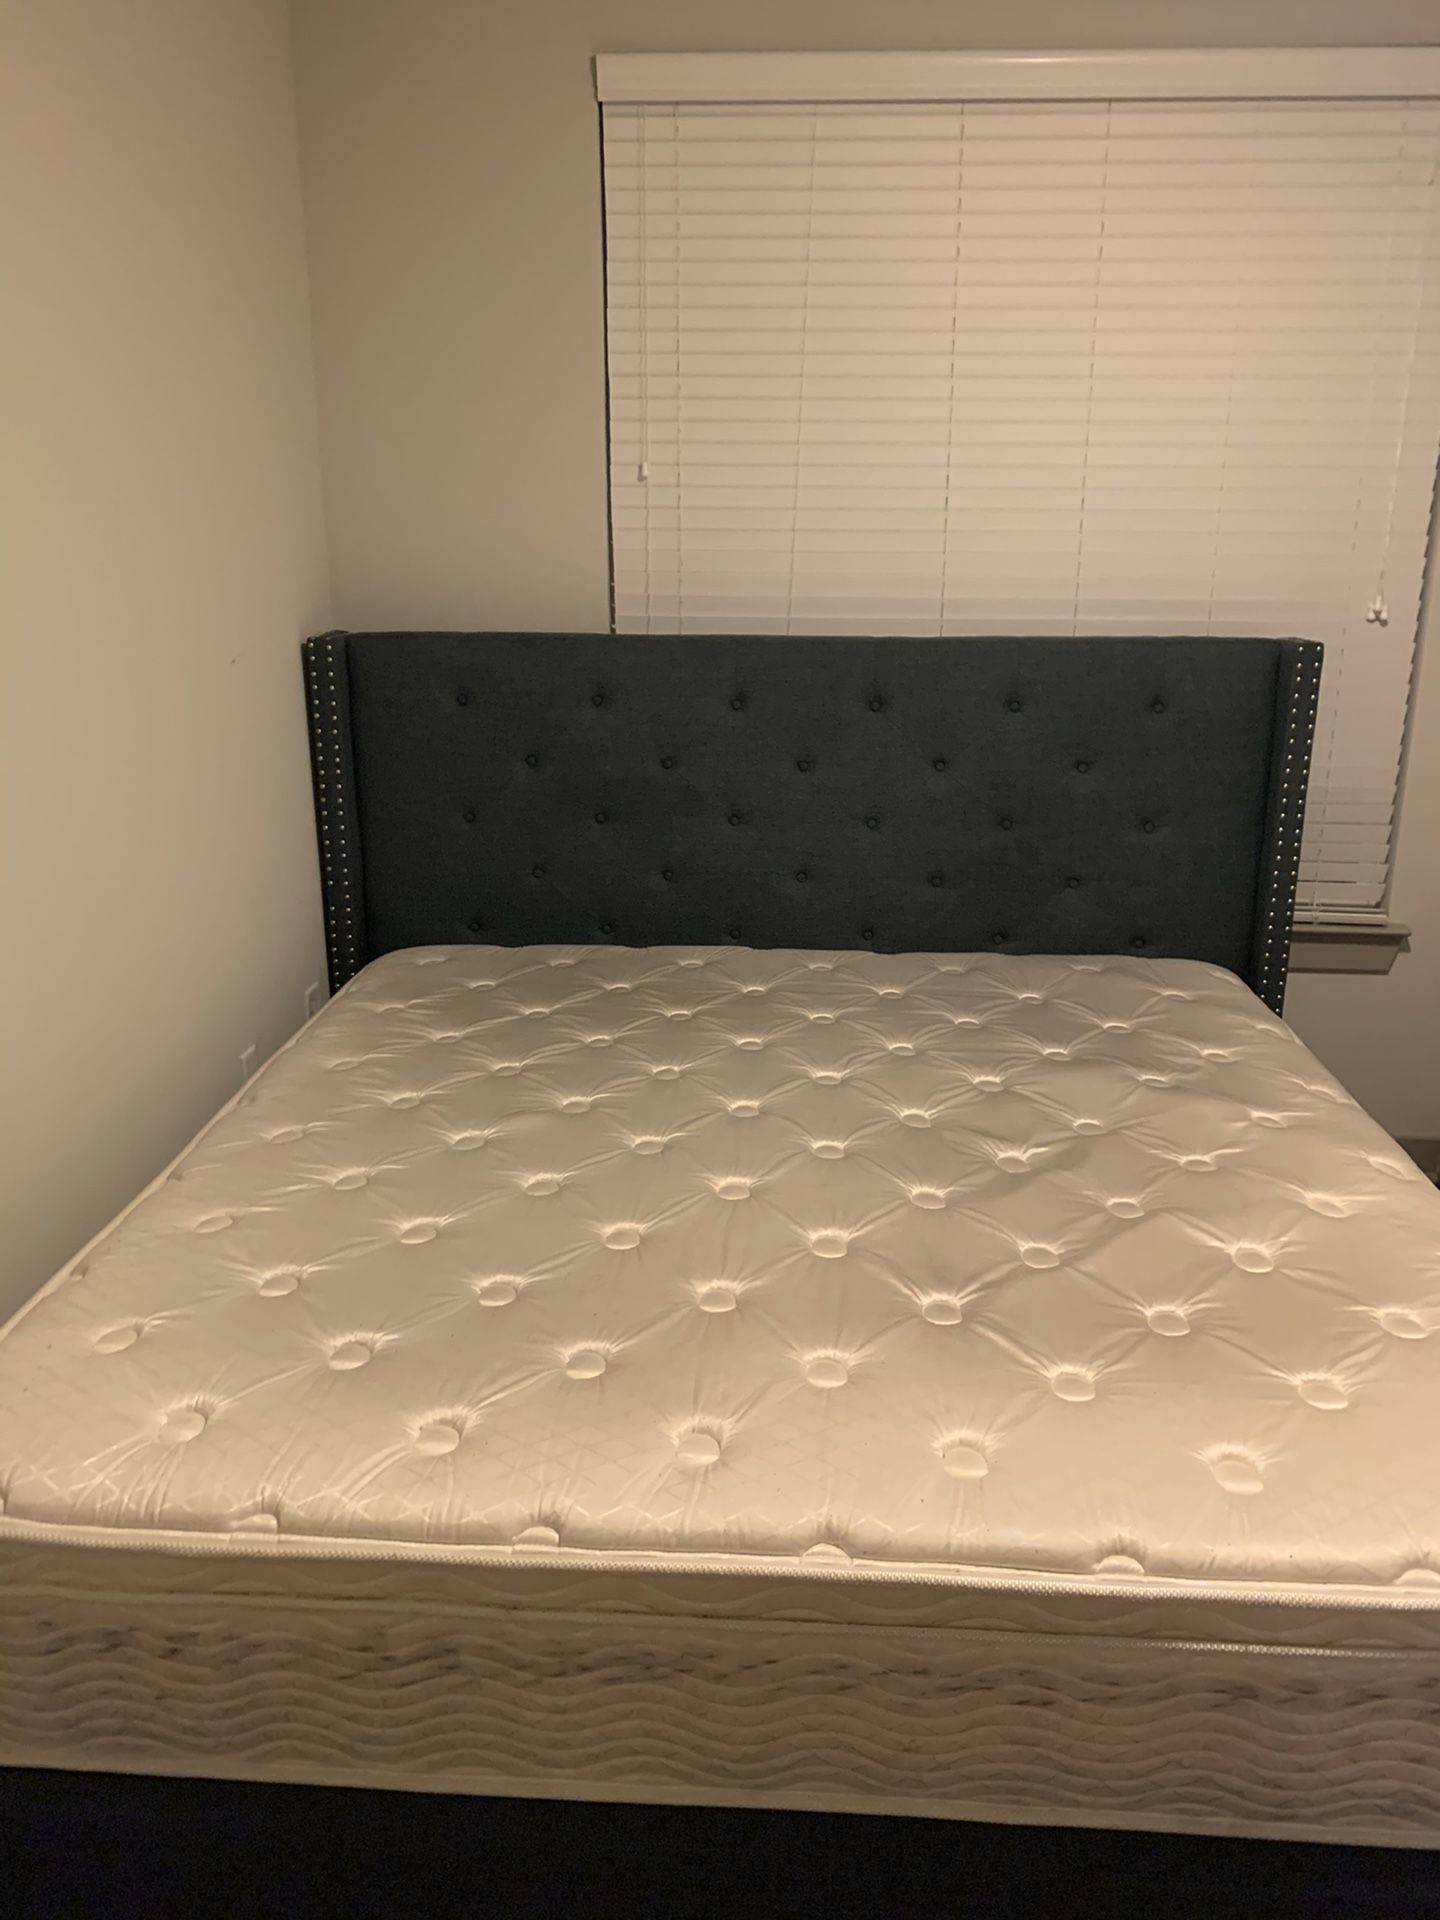 Bed frame with mattress